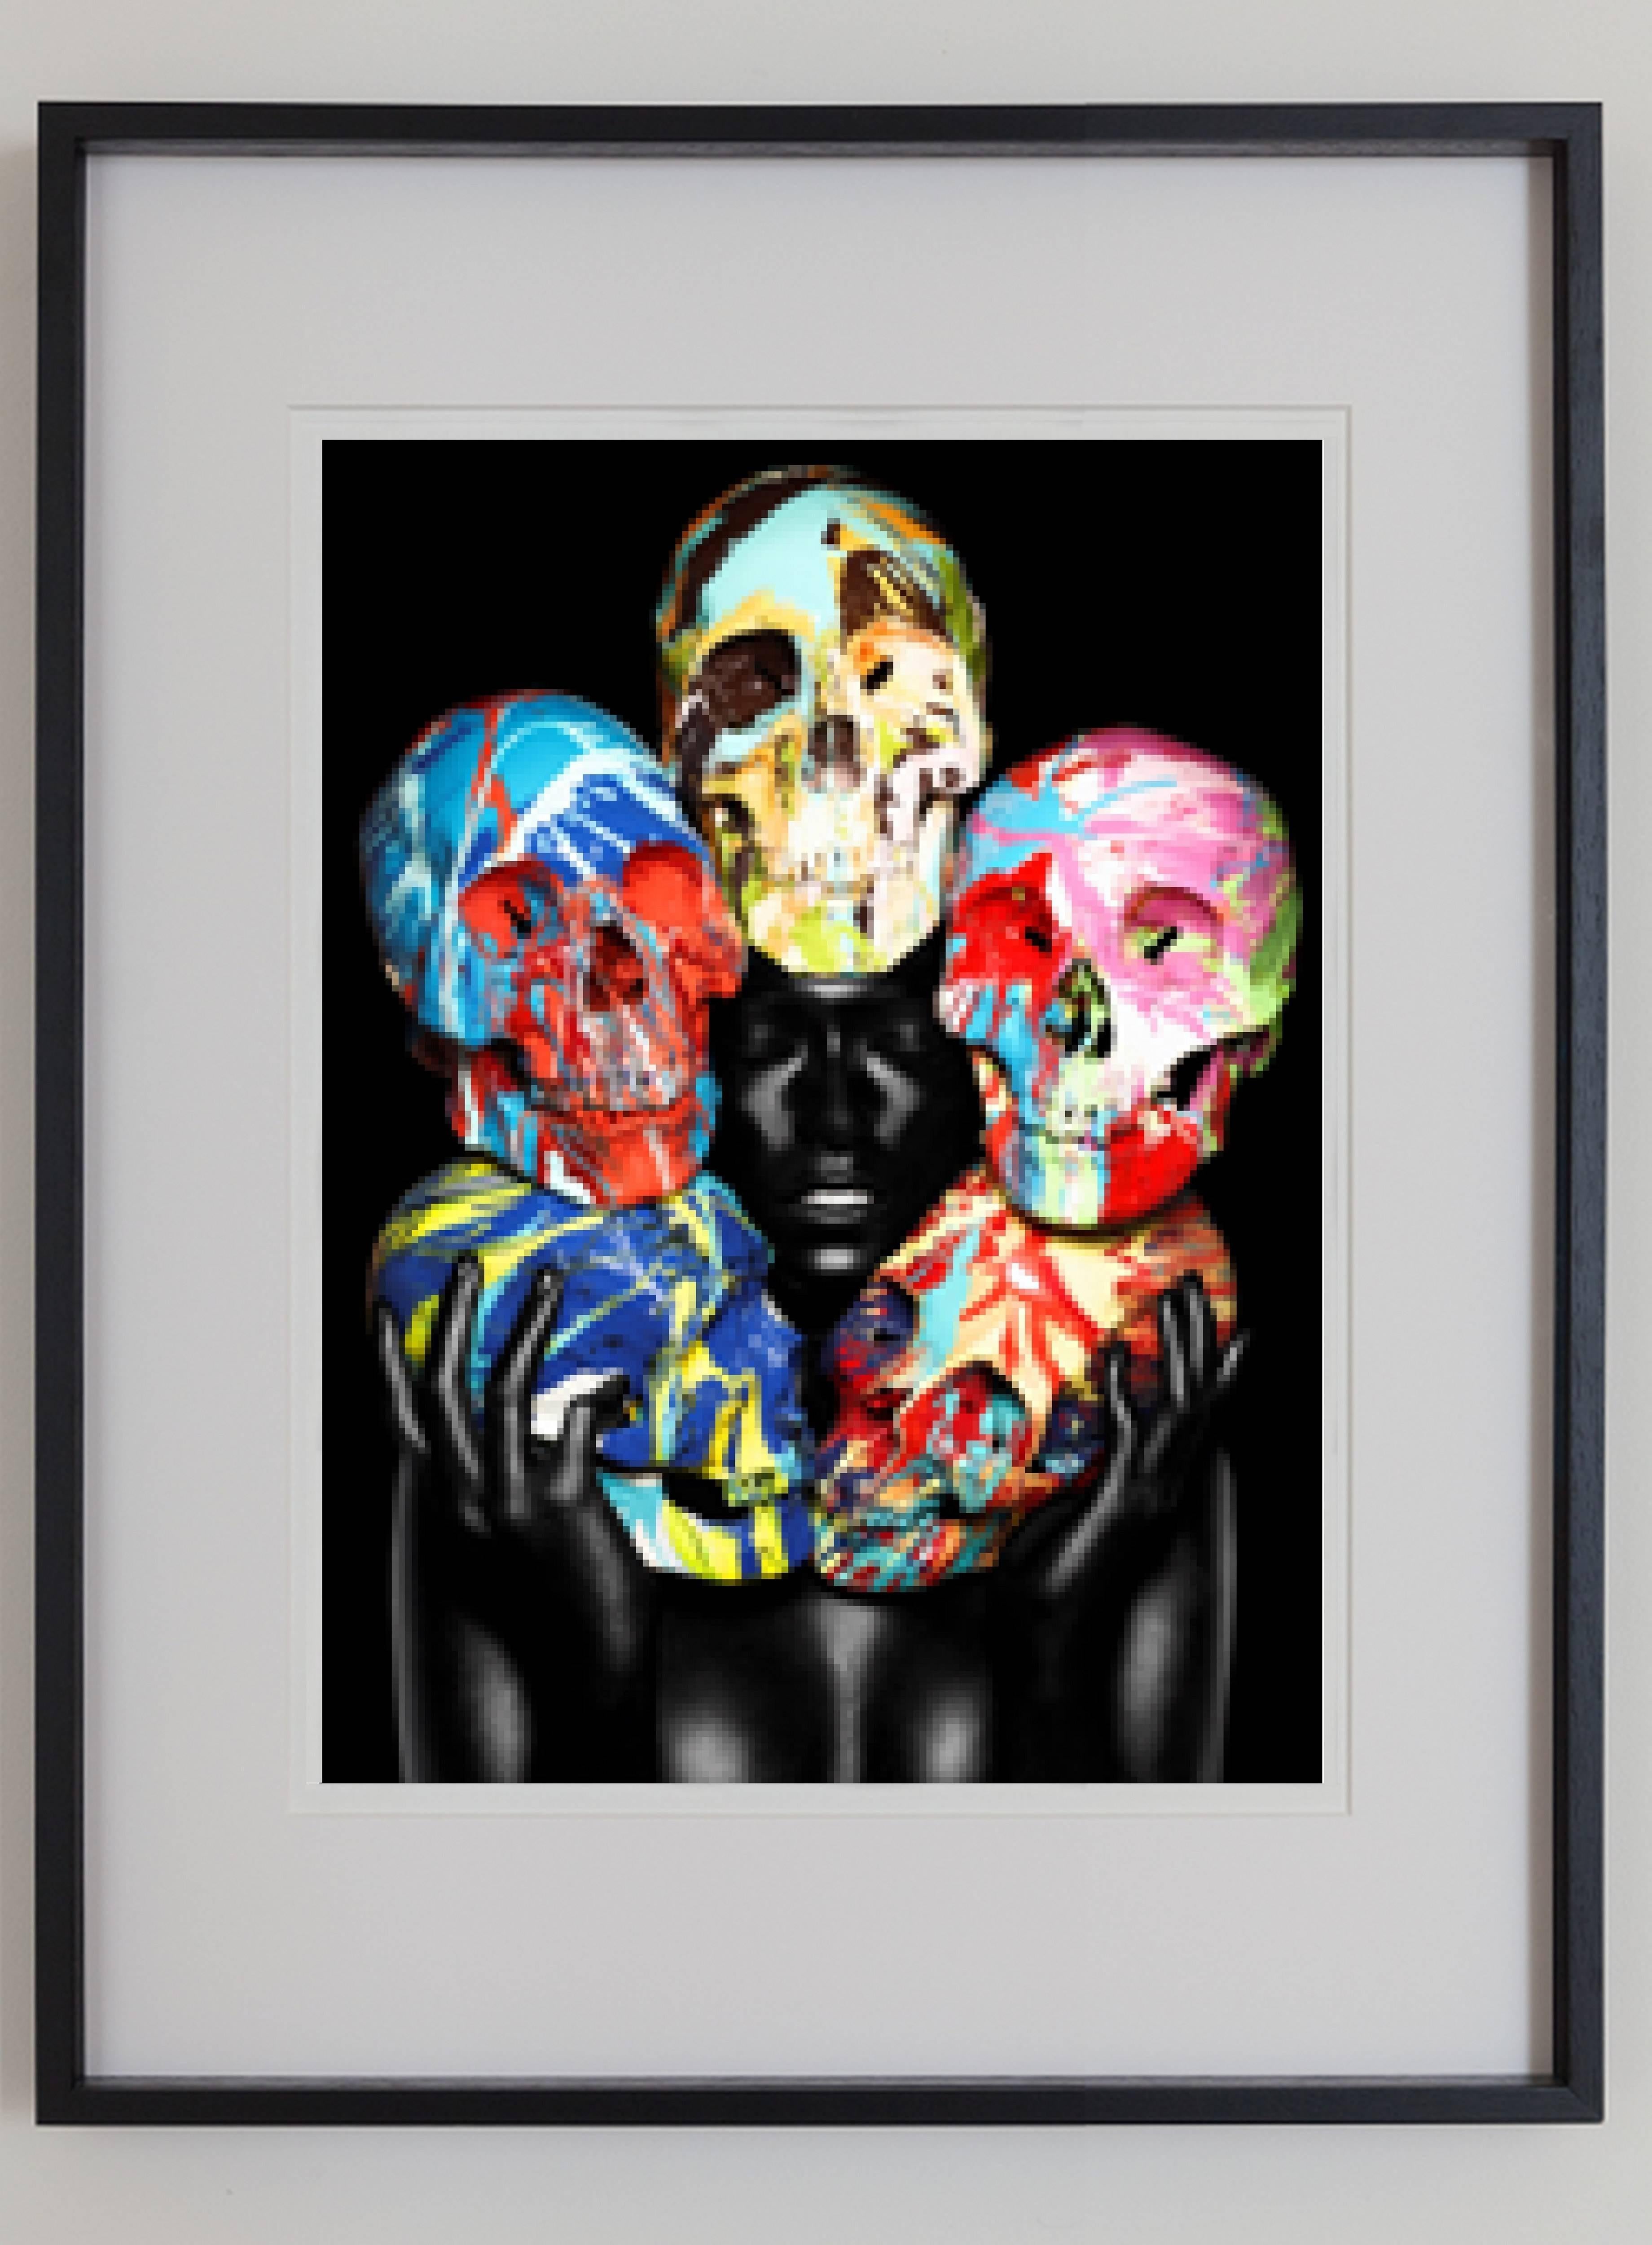 Painted Skulls - Eyes closed, black and colorful faces naked woman  - Photograph by Rankin and Damien Hirst